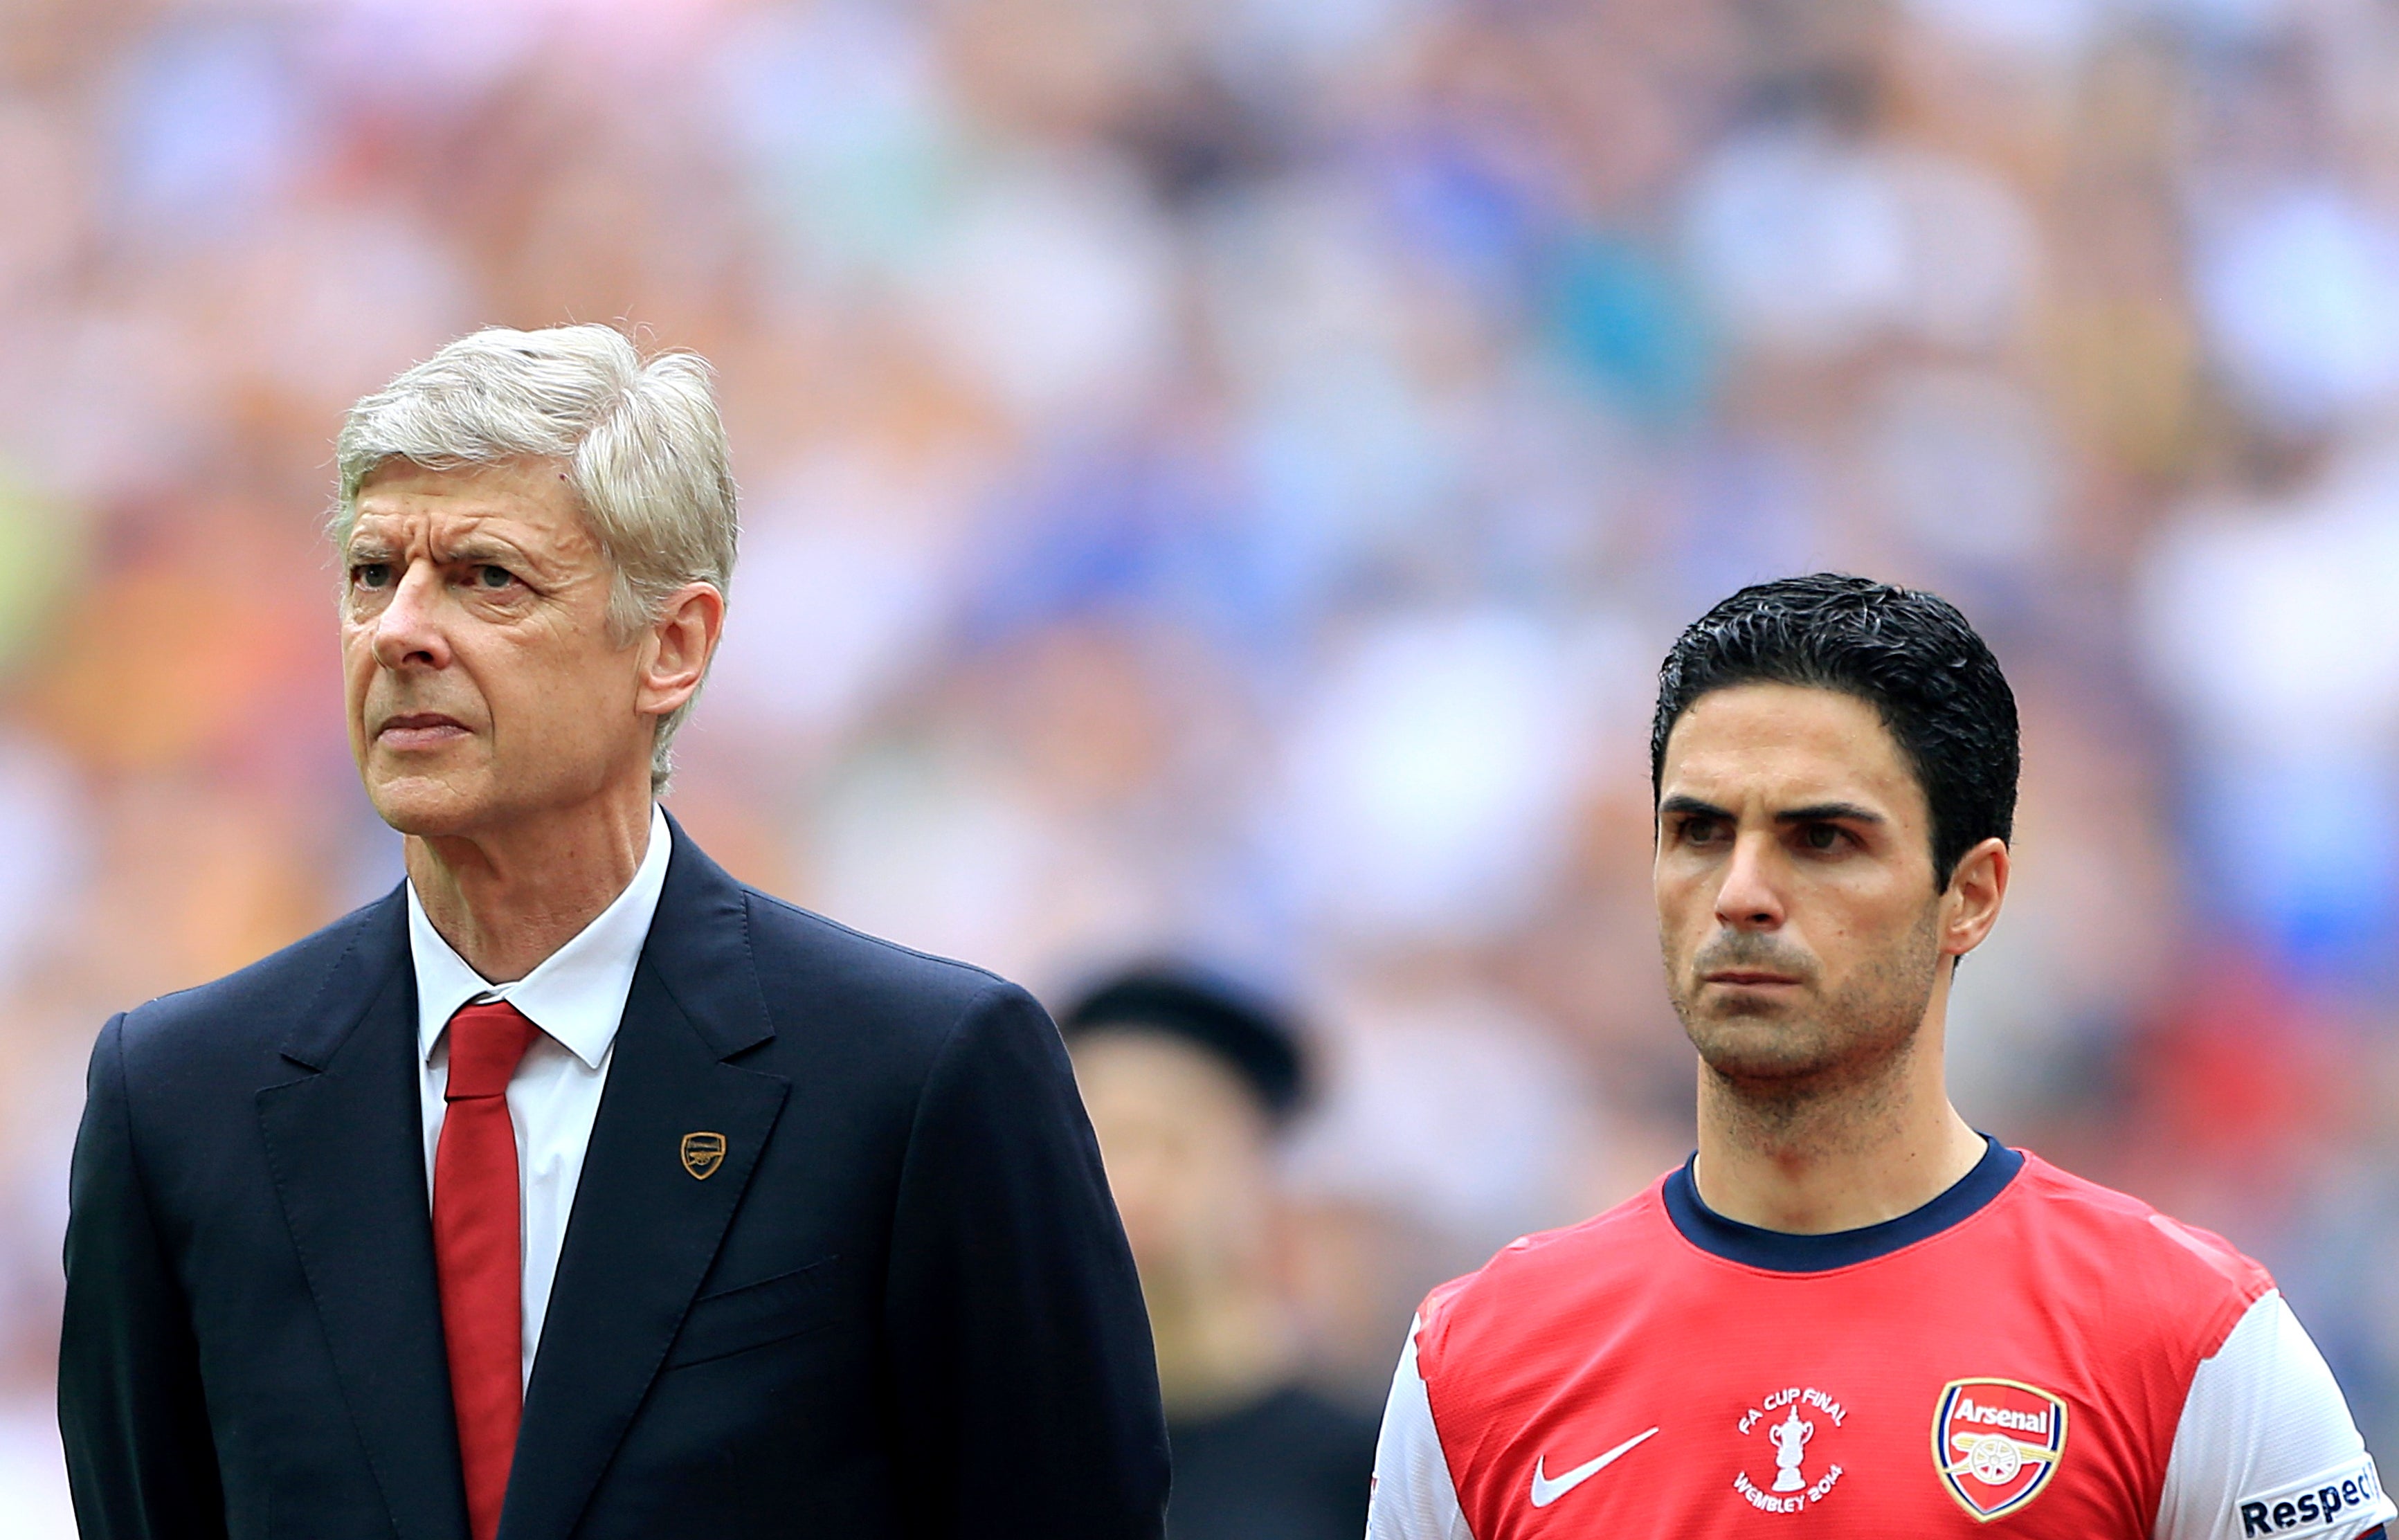 Mikel Arteta admits Arsene Wenger's legacy gave him doubts about Arsenal  job | The Independent